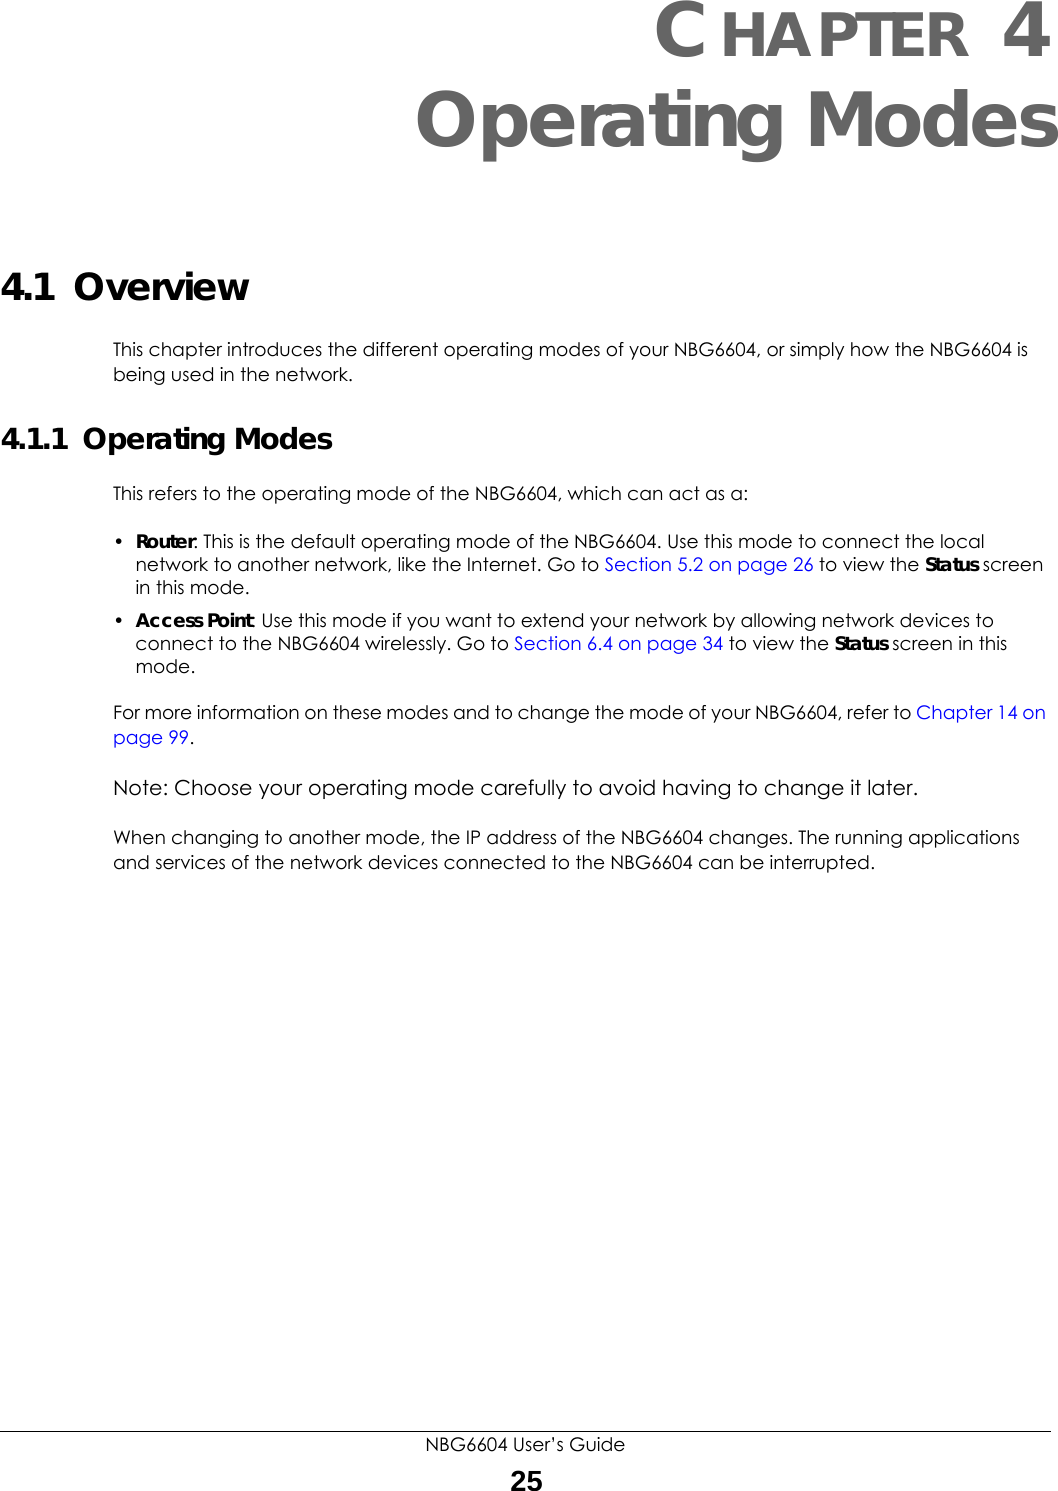 NBG6604 User’s Guide25CHAPTER 4 Operating Modes4.1  OverviewThis chapter introduces the different operating modes of your NBG6604, or simply how the NBG6604 is being used in the network. 4.1.1  Operating ModesThis refers to the operating mode of the NBG6604, which can act as a:•Router: This is the default operating mode of the NBG6604. Use this mode to connect the local network to another network, like the Internet. Go to Section 5.2 on page 26 to view the Status screen in this mode.•Access Point: Use this mode if you want to extend your network by allowing network devices to connect to the NBG6604 wirelessly. Go to Section 6.4 on page 34 to view the Status screen in this mode.For more information on these modes and to change the mode of your NBG6604, refer to Chapter 14 on page 99.Note: Choose your operating mode carefully to avoid having to change it later.When changing to another mode, the IP address of the NBG6604 changes. The running applications and services of the network devices connected to the NBG6604 can be interrupted. 